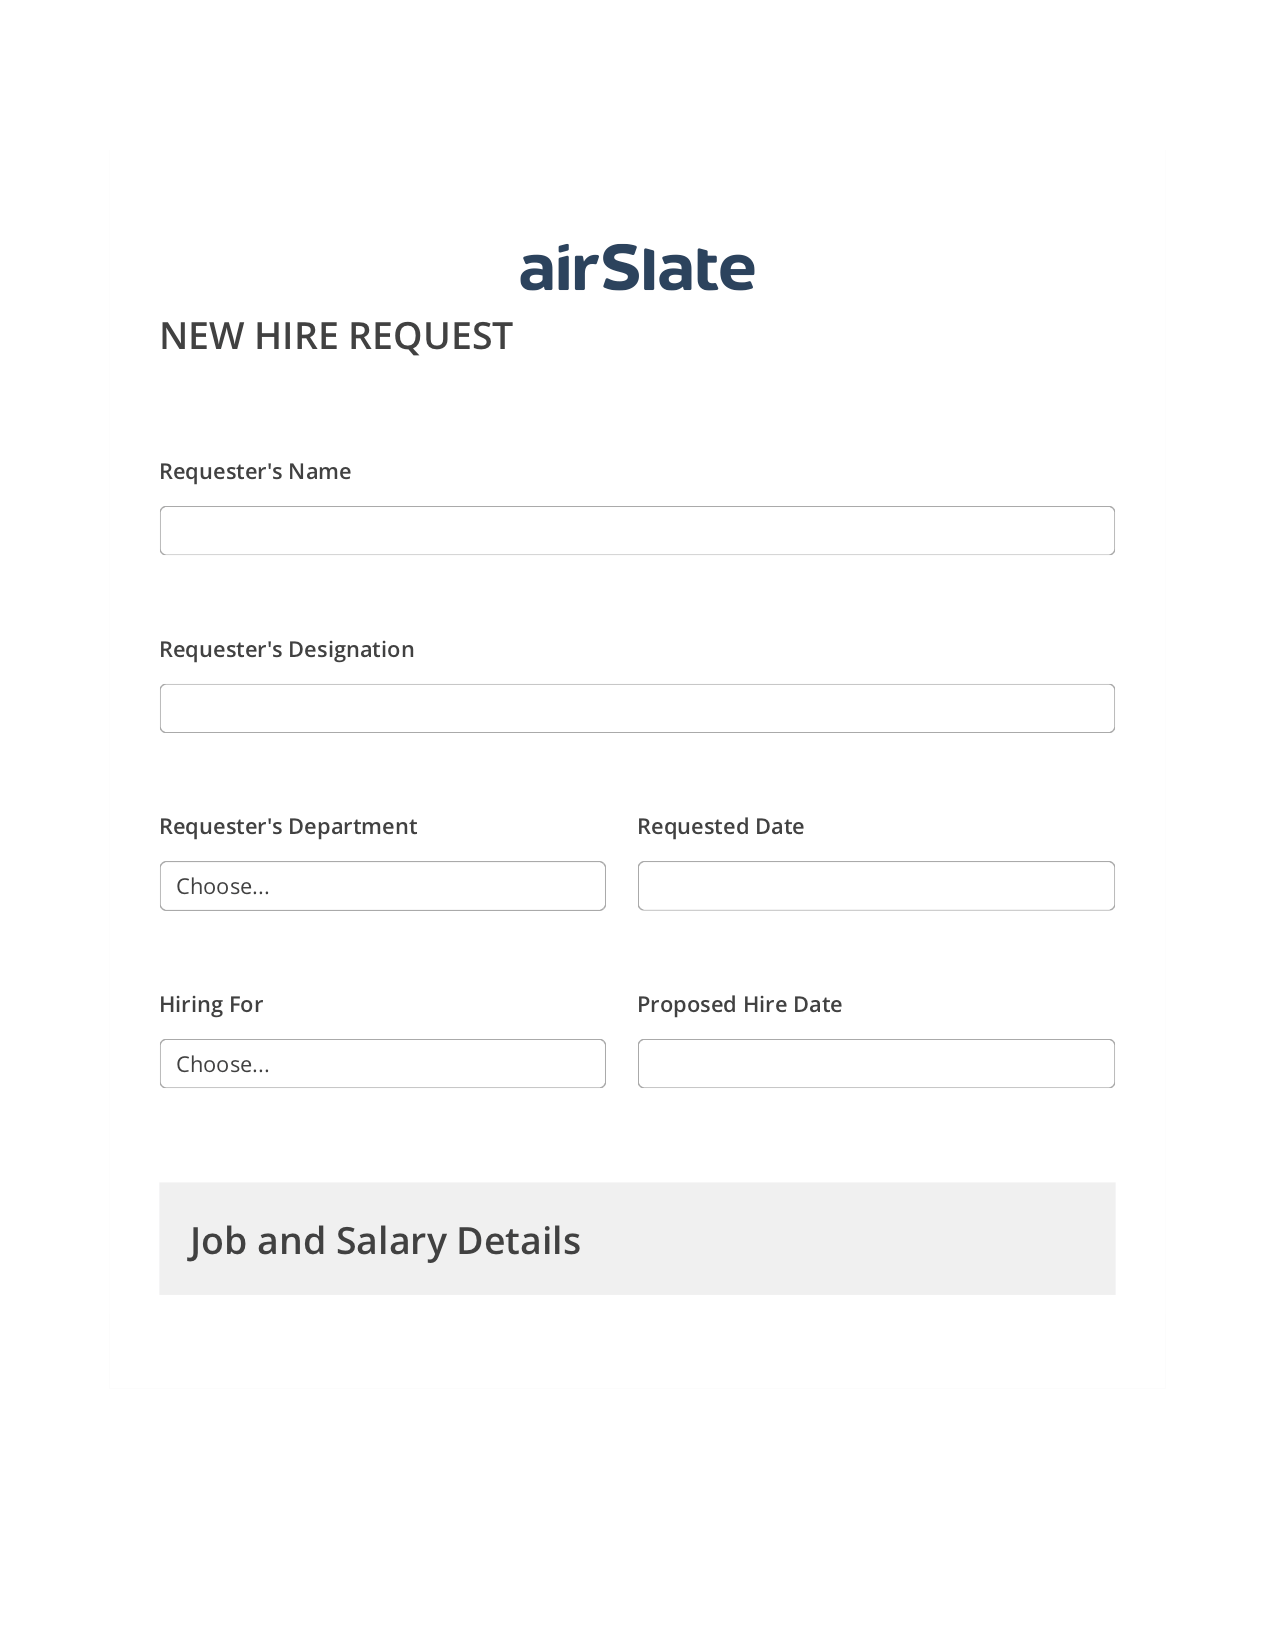 Hiring Request Workflow Pre-fill Dropdowns from Excel Bot, Send a Slate with Roles Bot, Archive to Box Bot